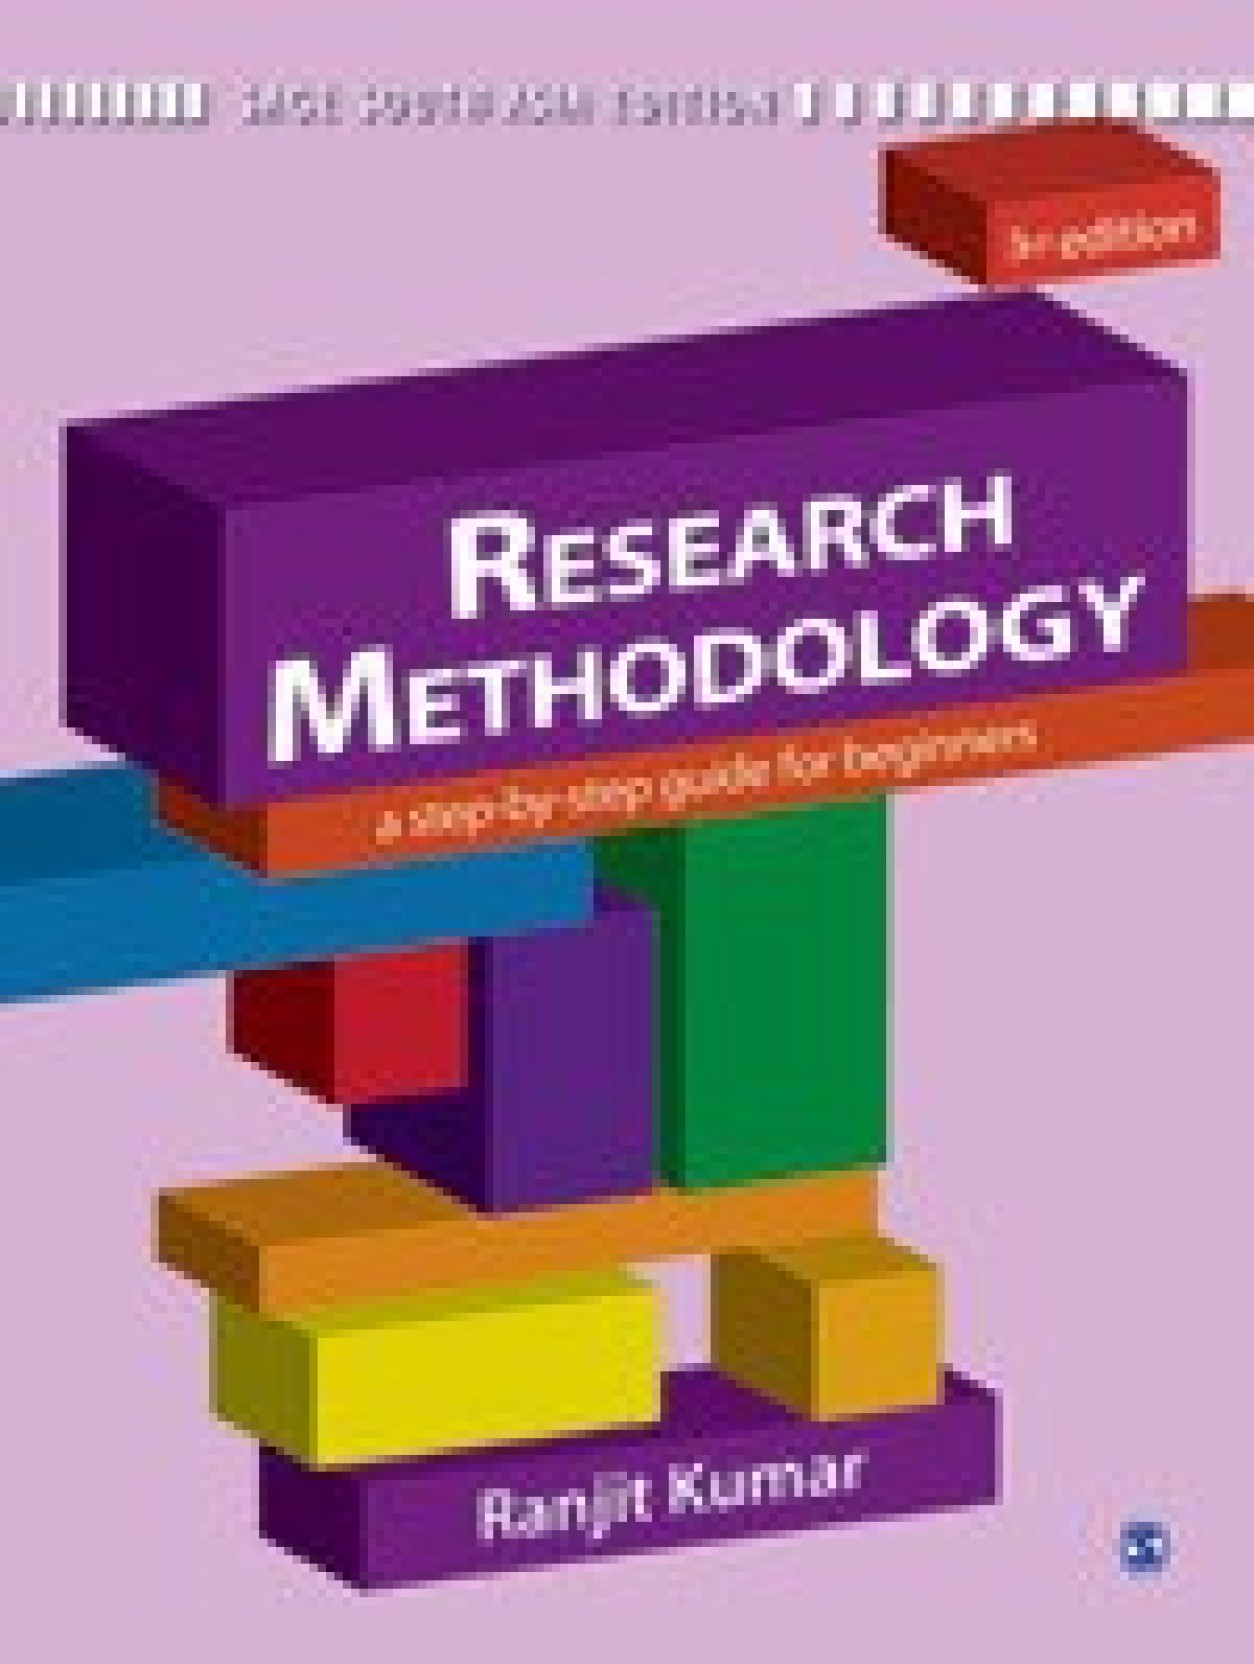 best books on research methodology